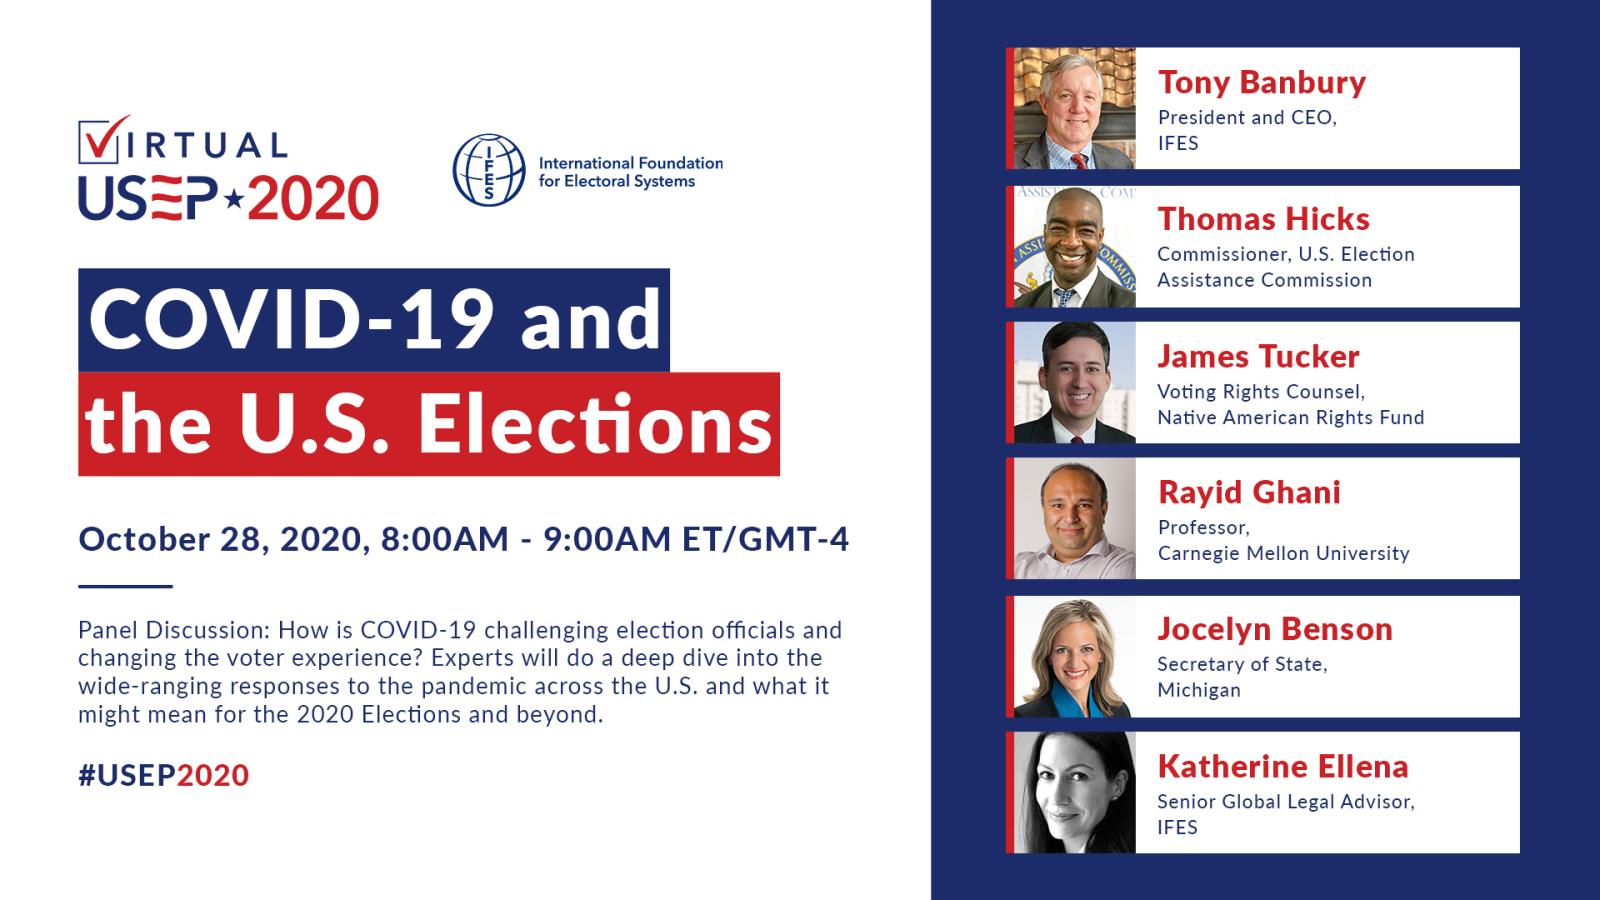 COVID-19 and the U.S. Elections